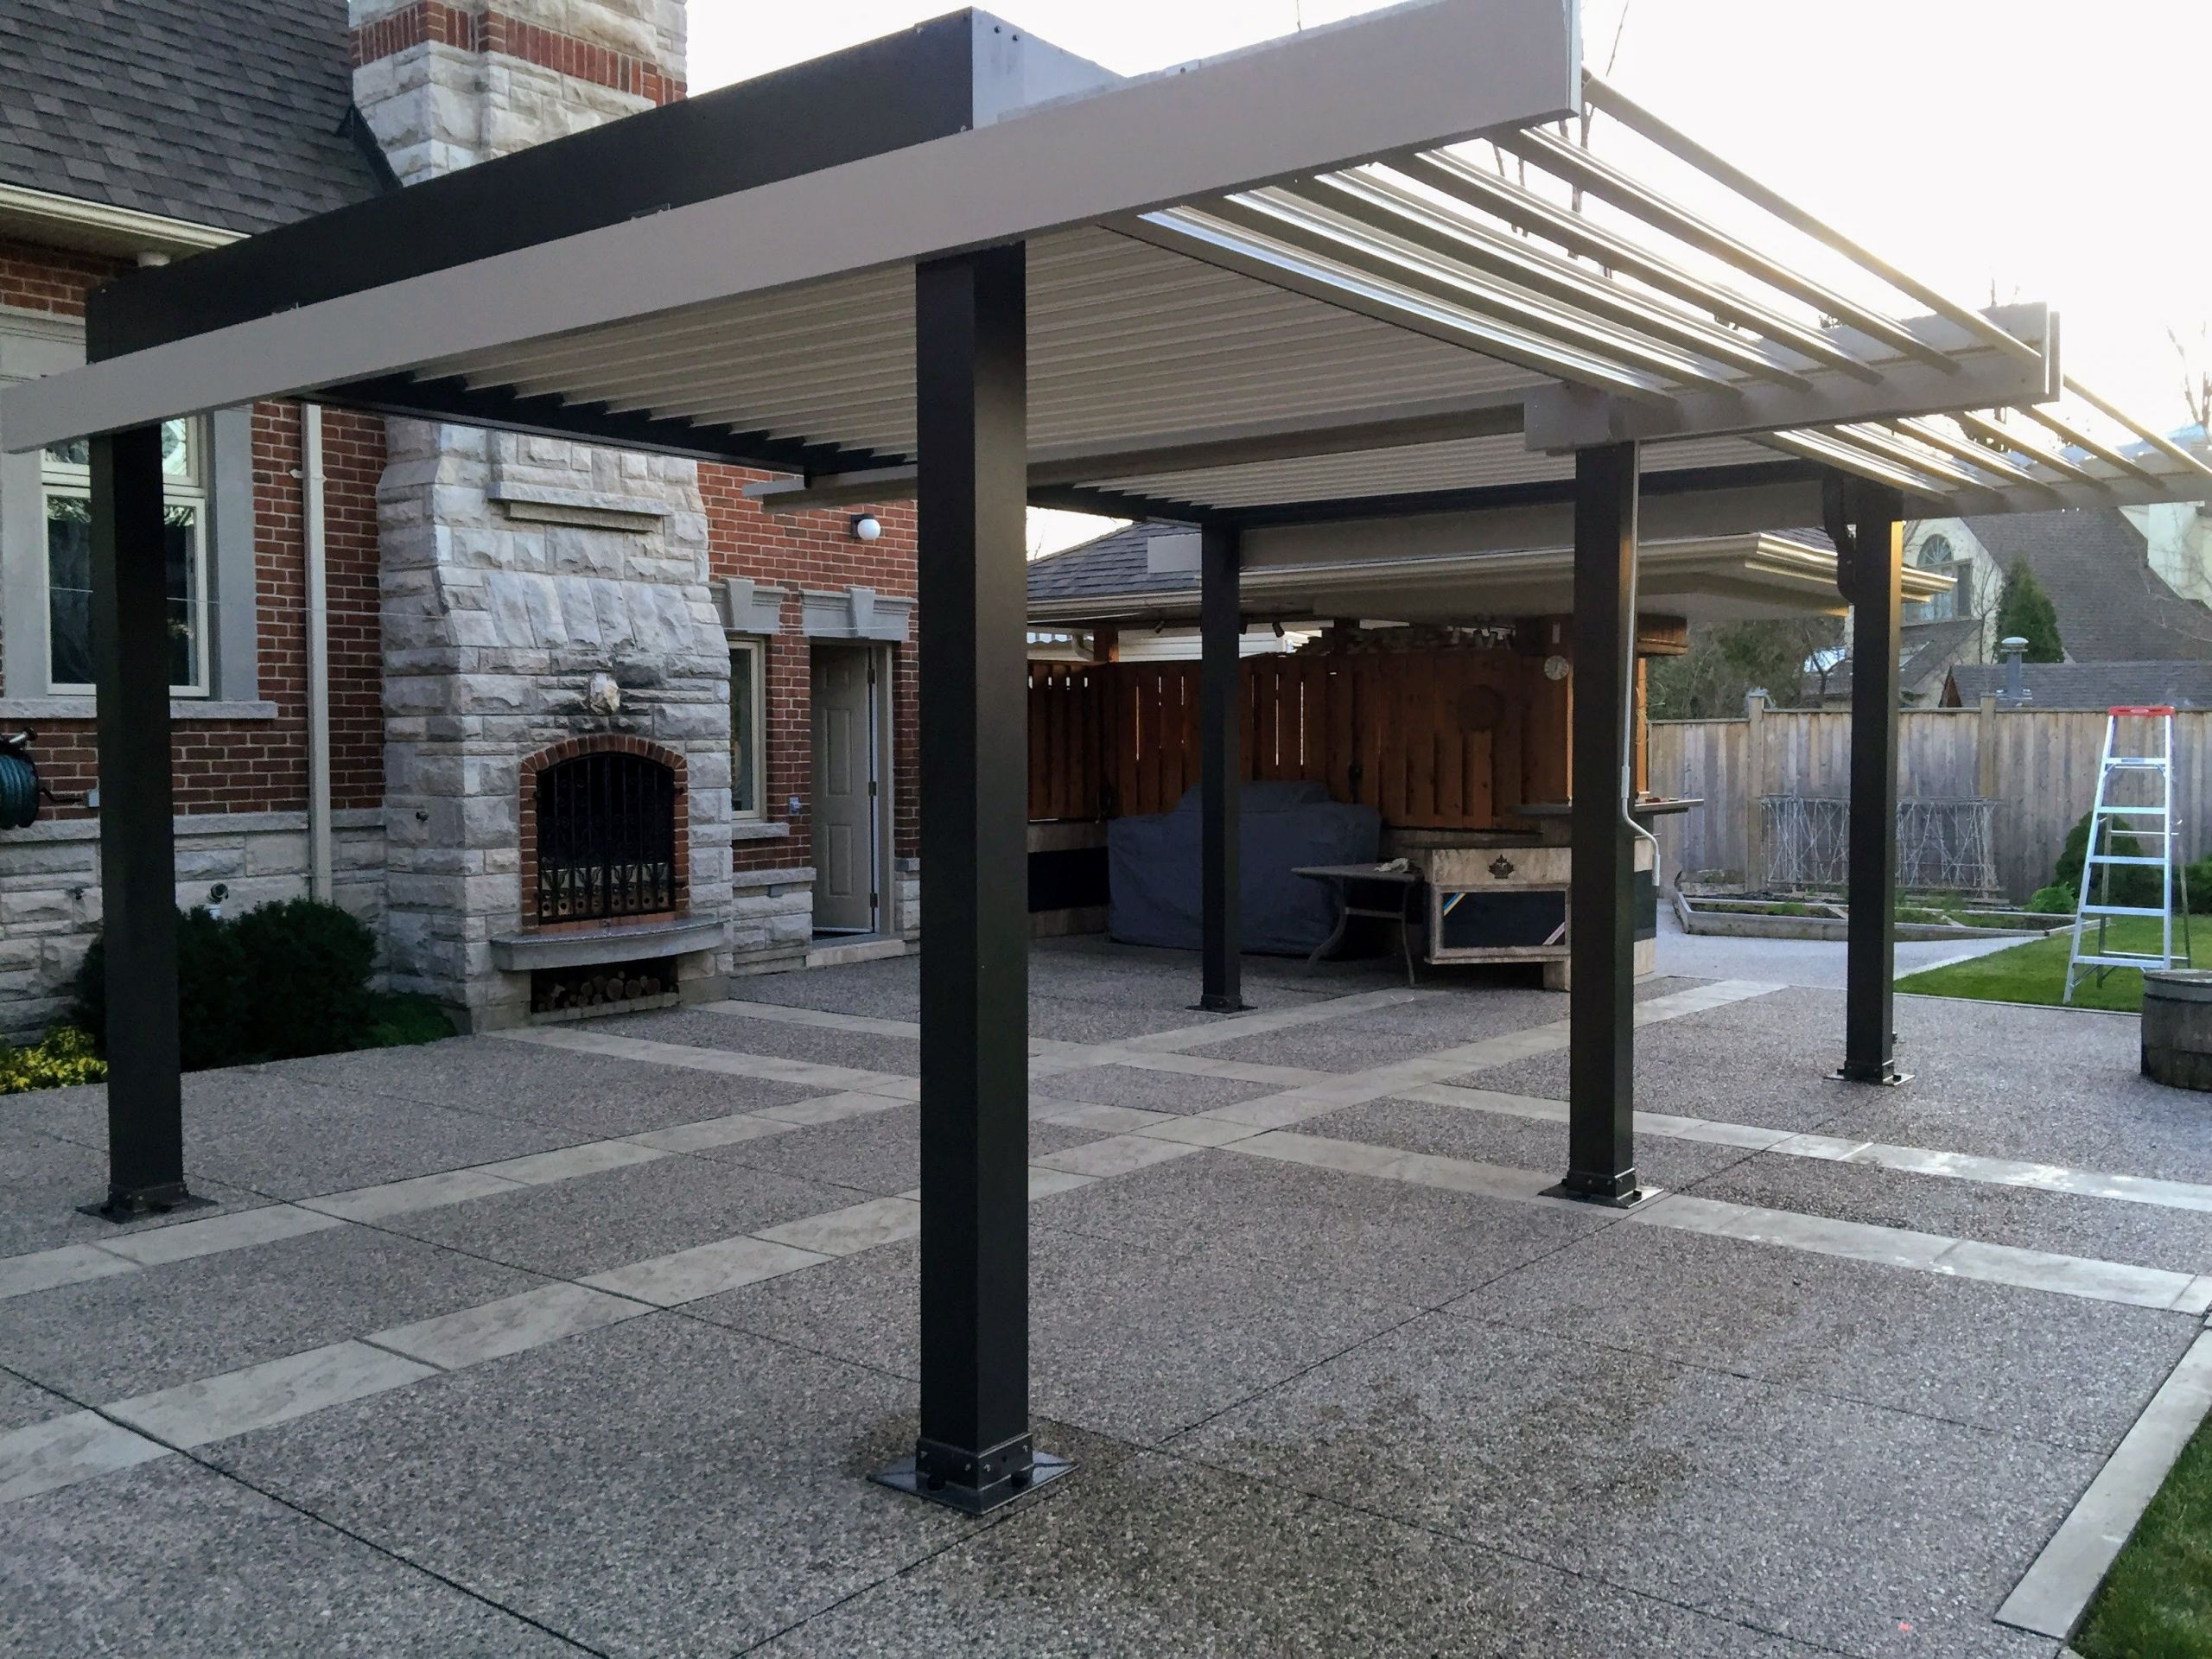 Pergola Bois Brico Depot Élégant Advanced Opening and Closing Louvered Roof System